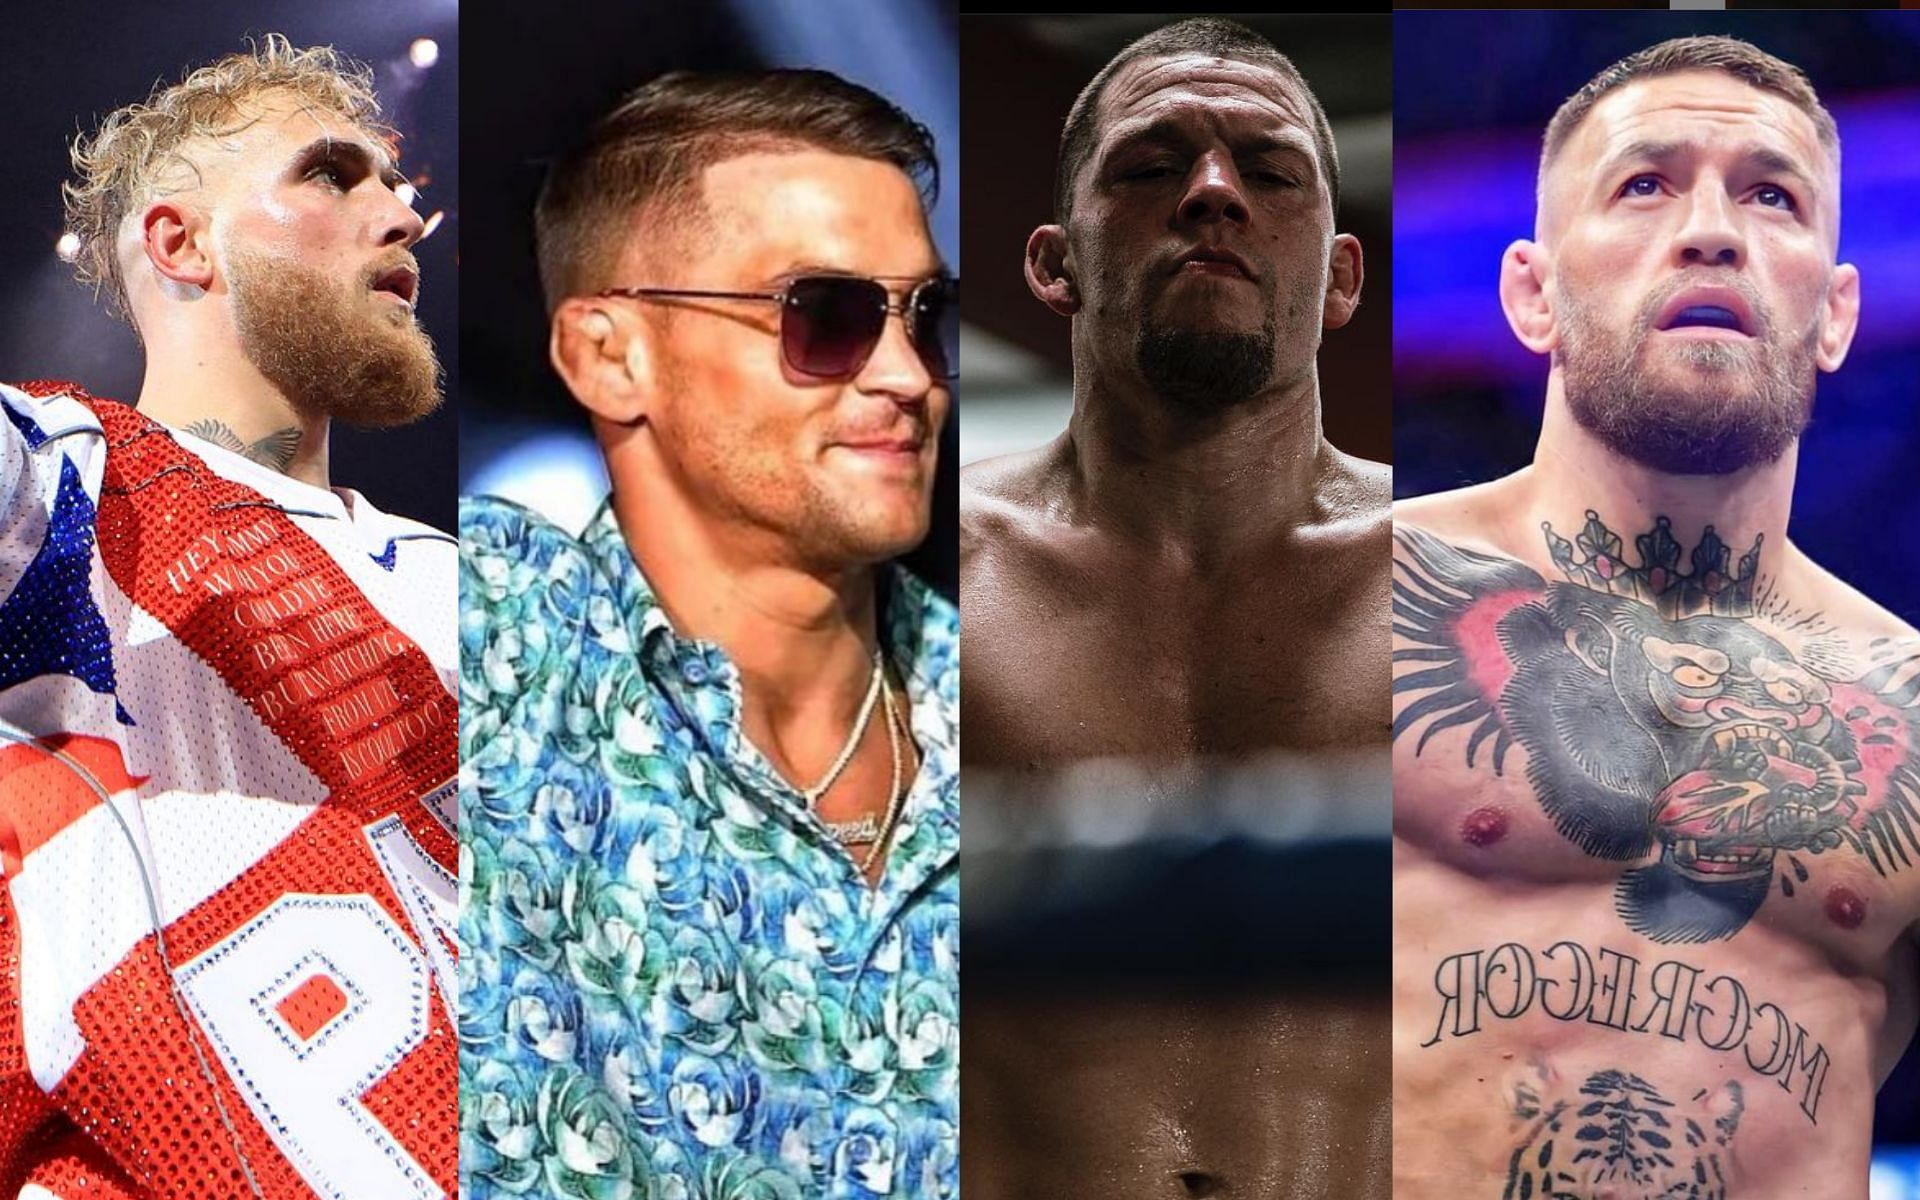 Dustin Poirier slams Nate Diaz for pretending to want the fight against him, advises the Stockton native to fight Conor McGregor or Jake Paul instead. [Credits: @dustinpoirier, @thenotoriousmma, @natediaz209 via Instagram]